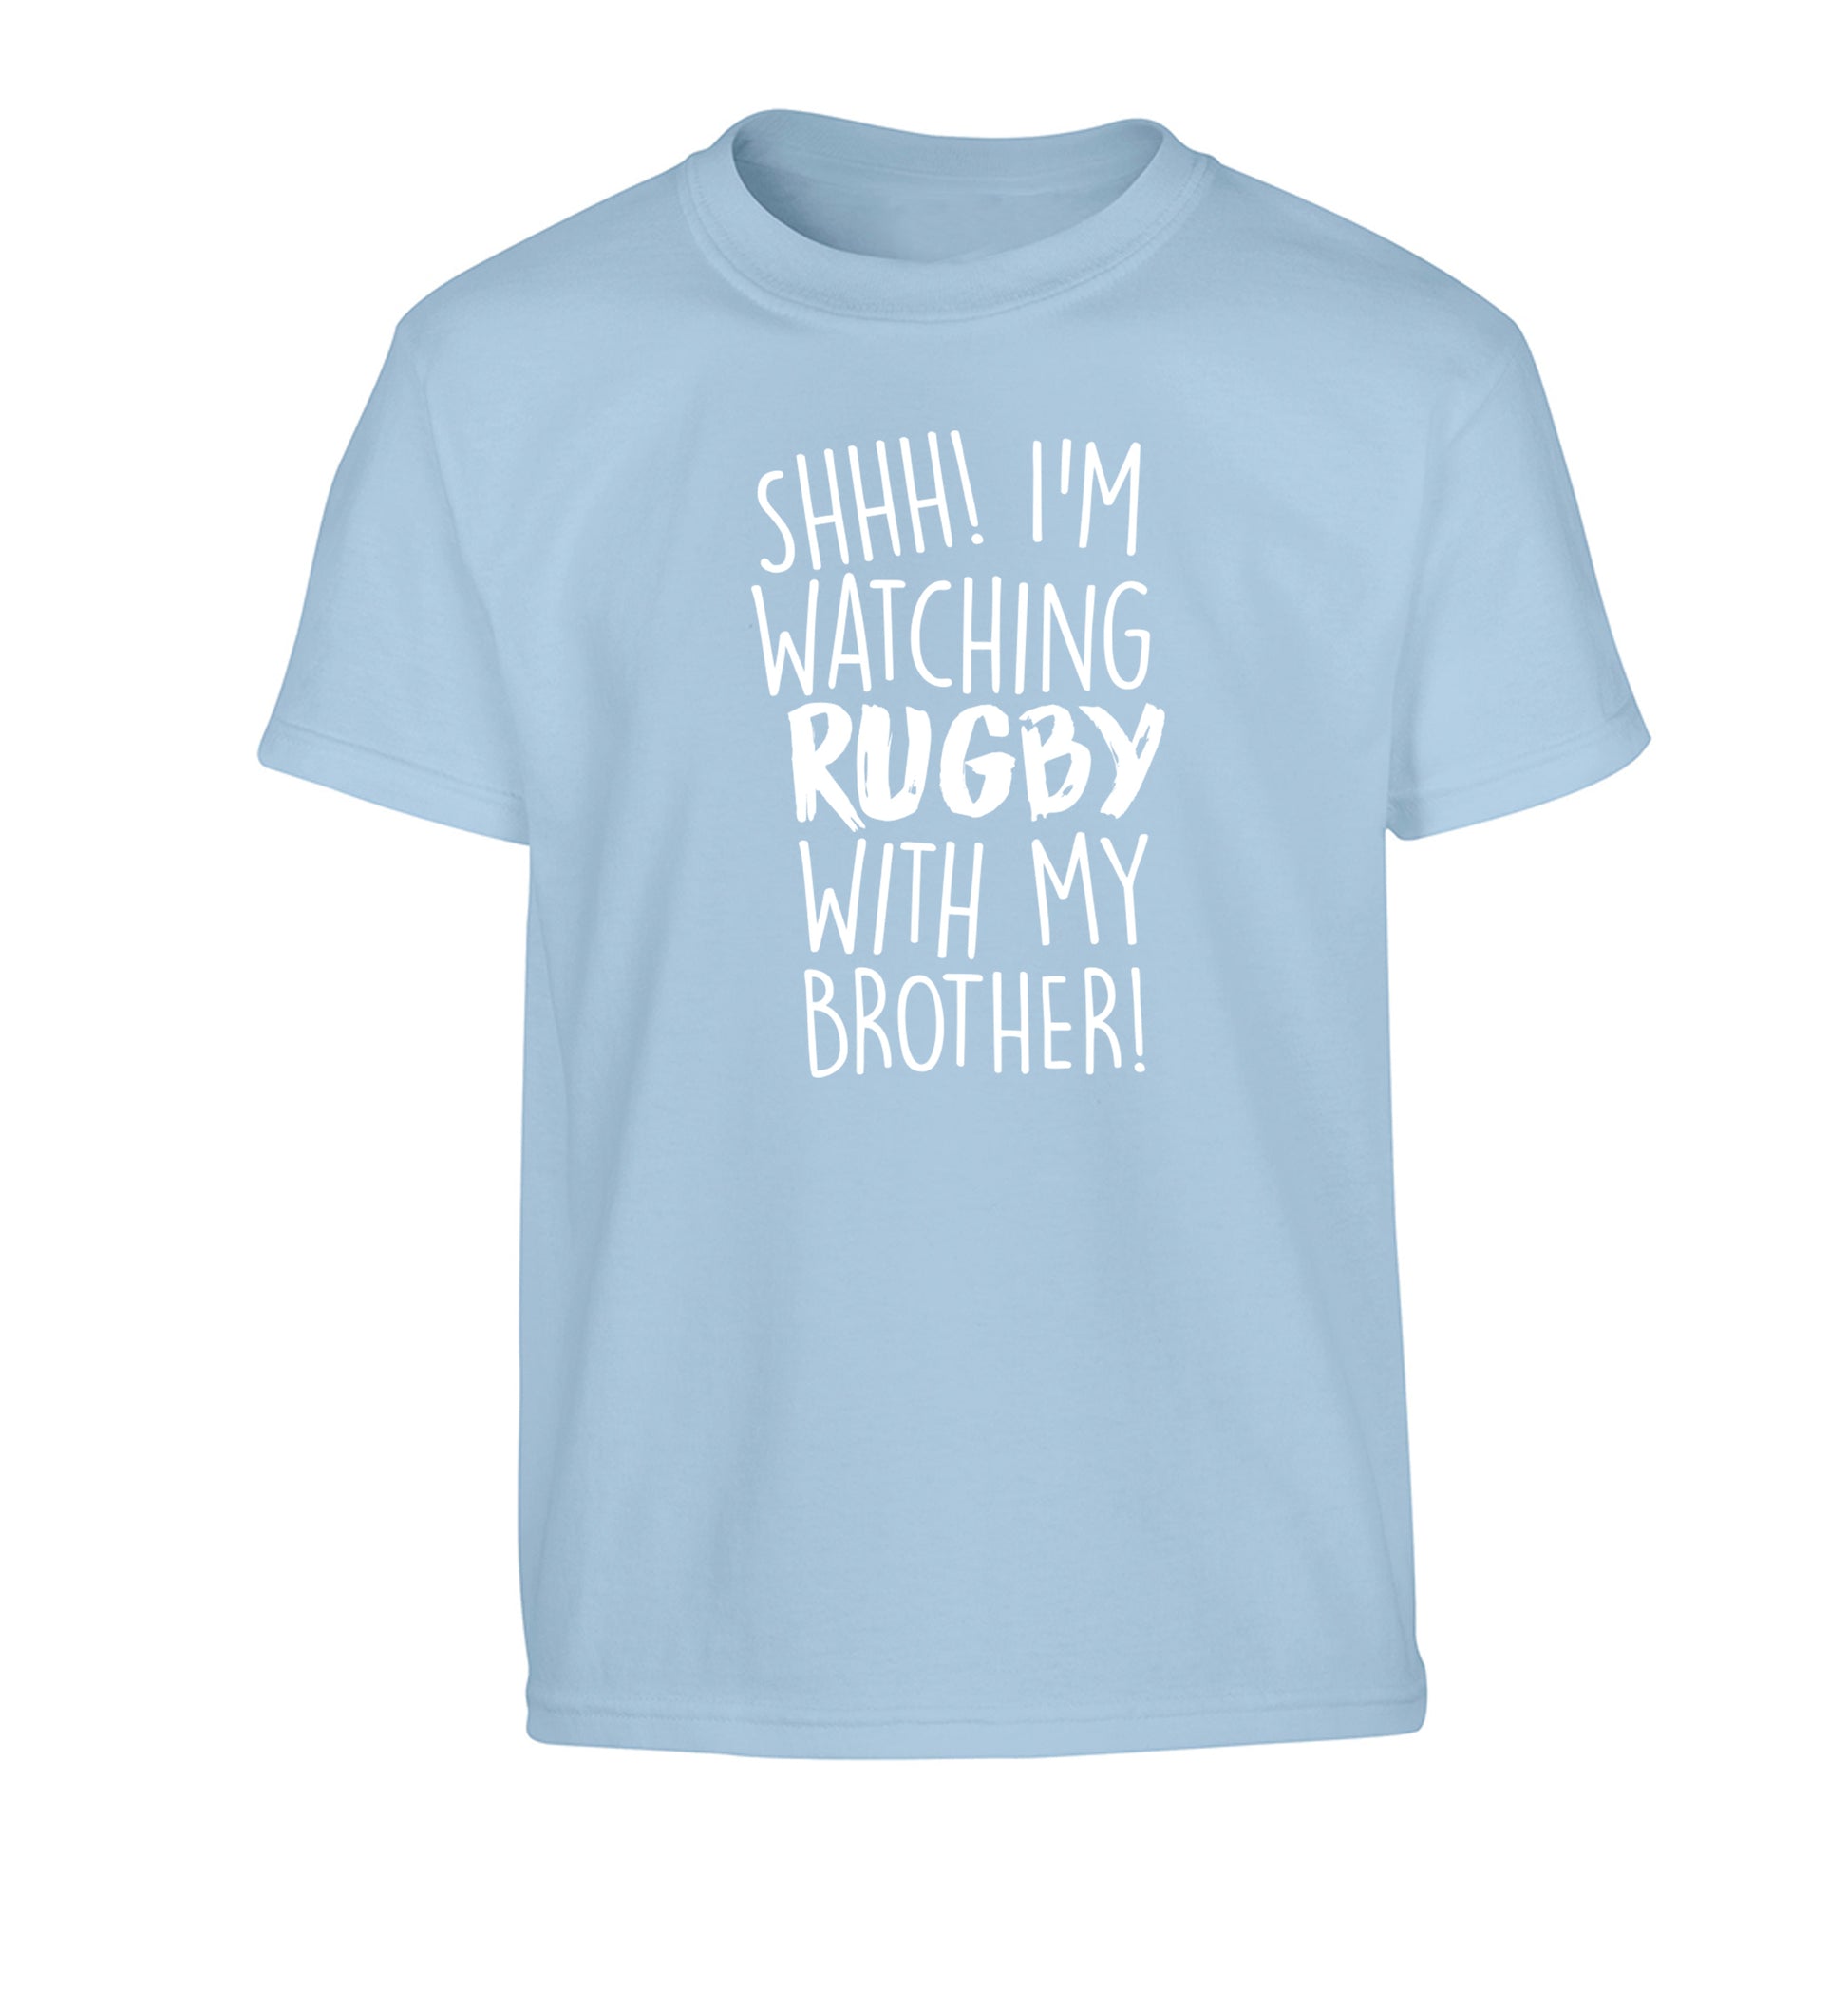 Shh... I'm watching rugby with my brother Children's light blue Tshirt 12-13 Years